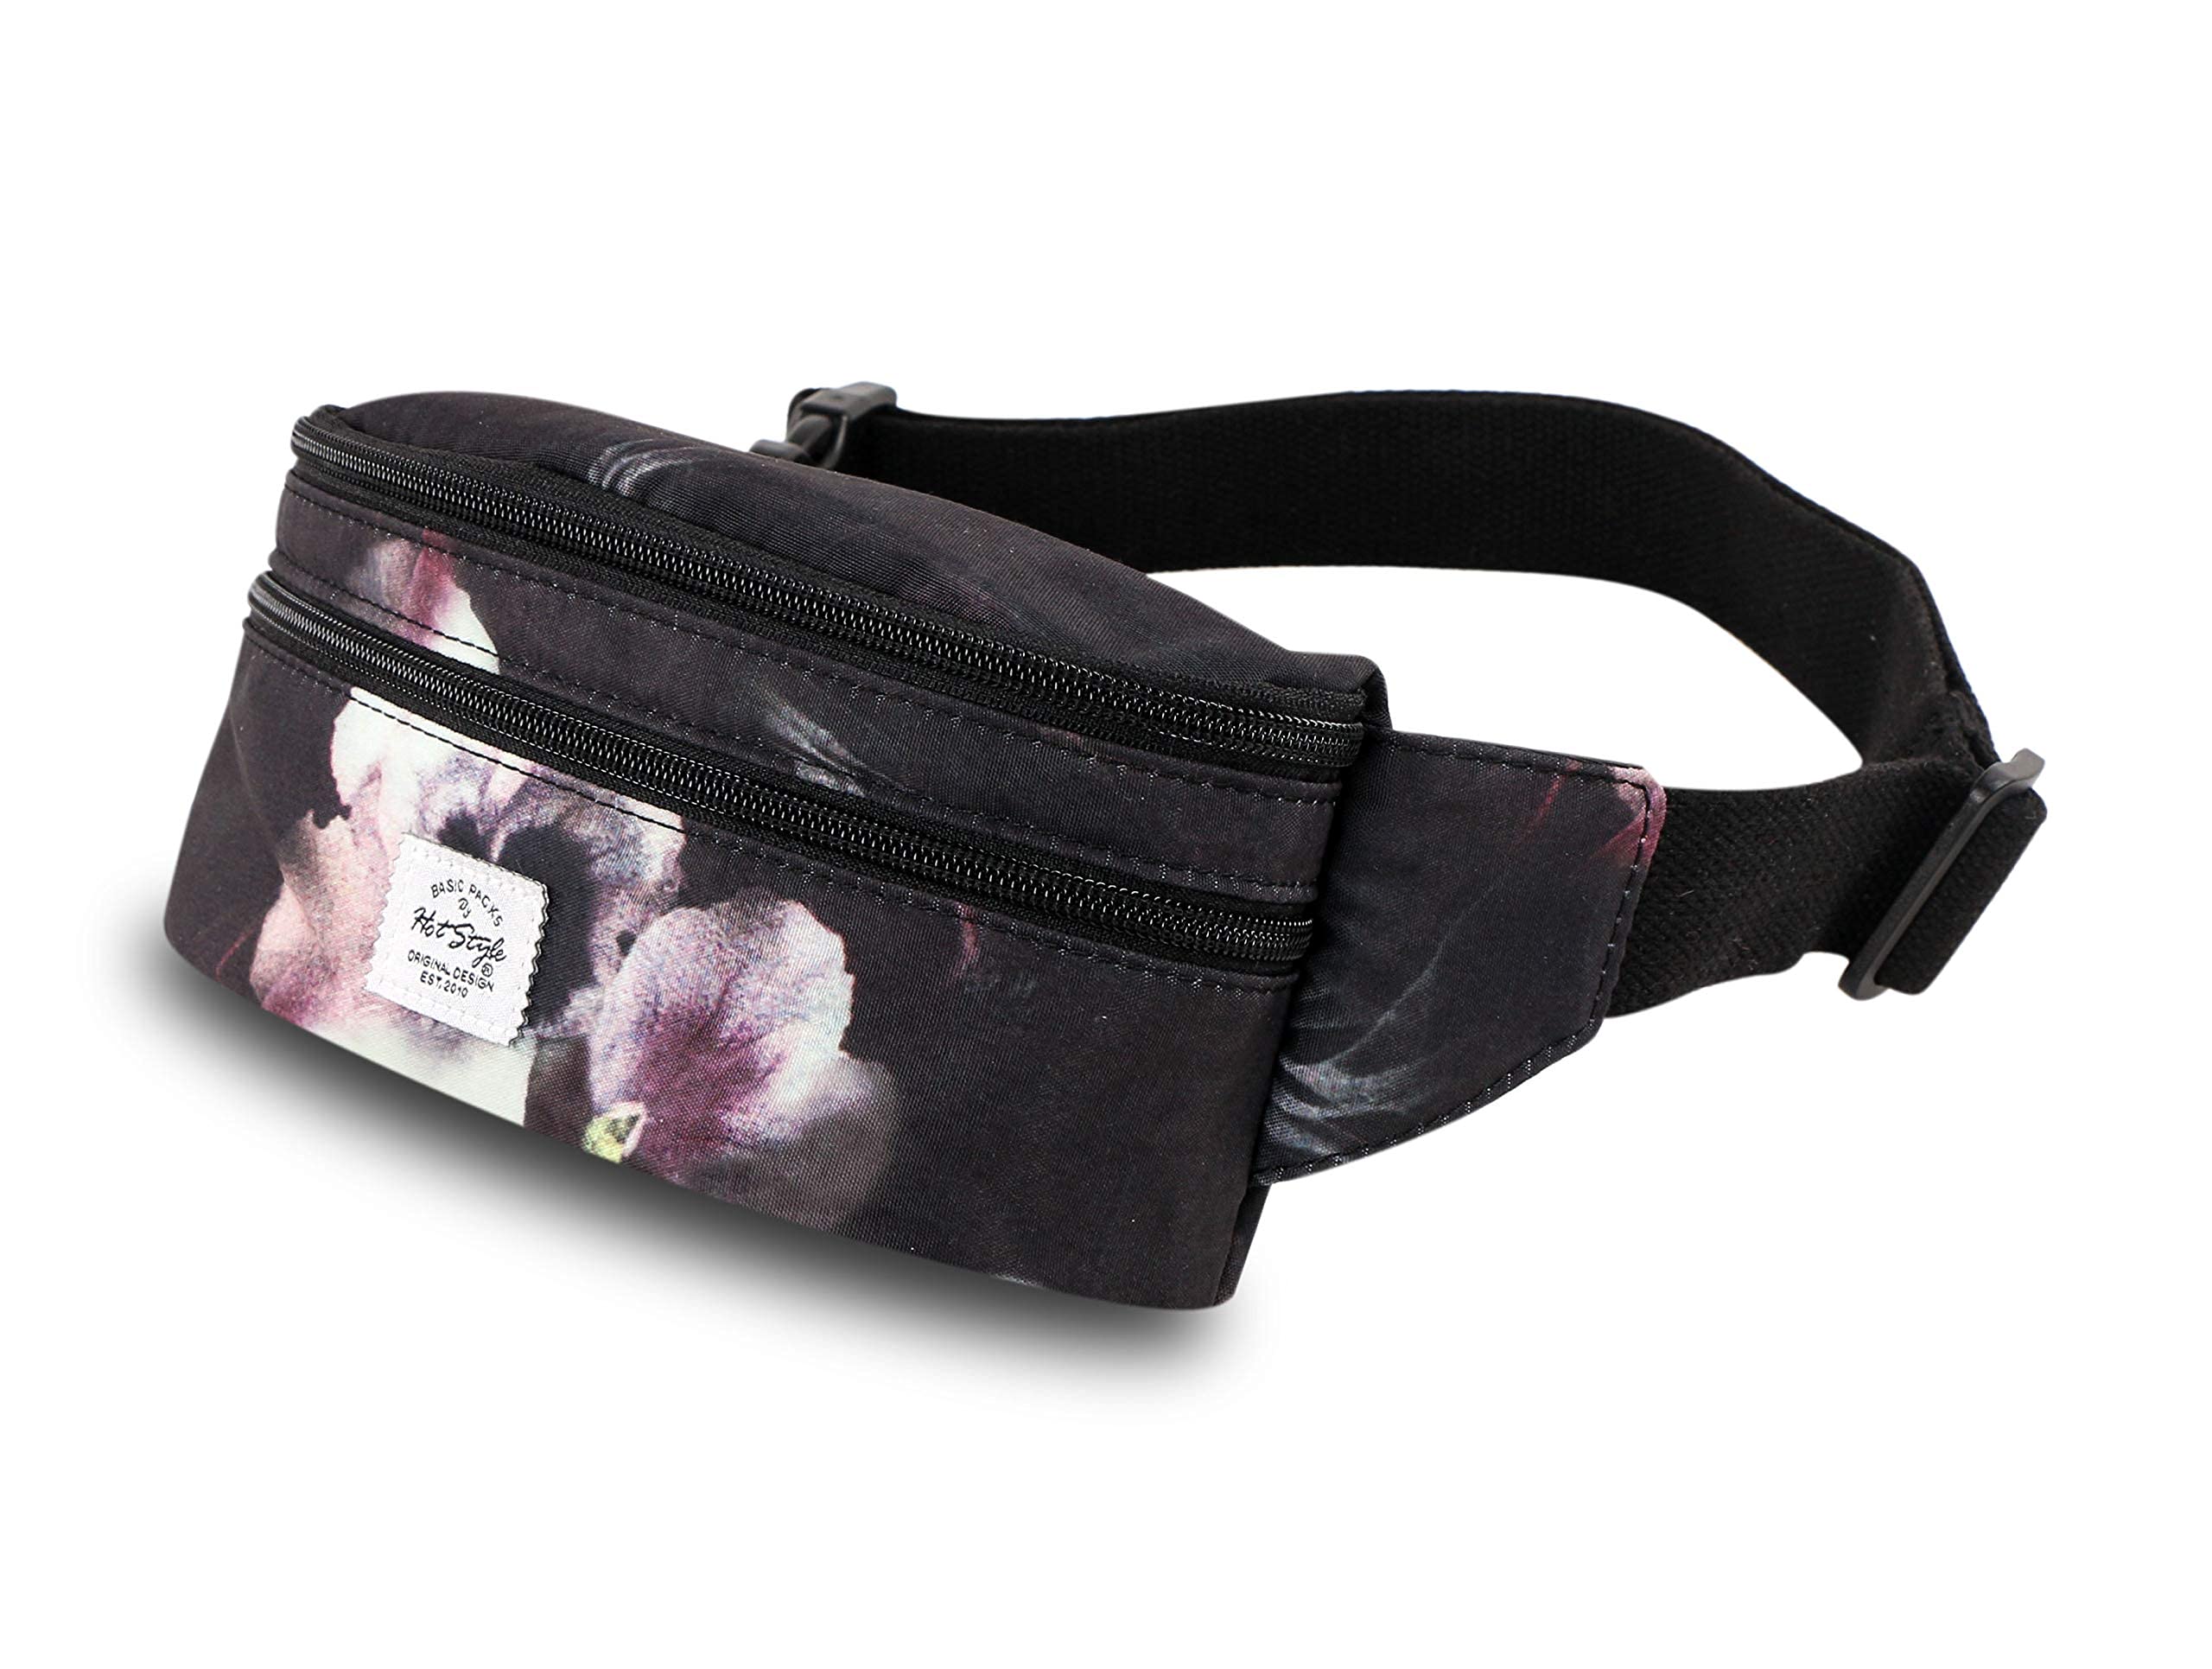 HotStyle 521s Small Fanny Pack Waist Bag for Women, 8.0